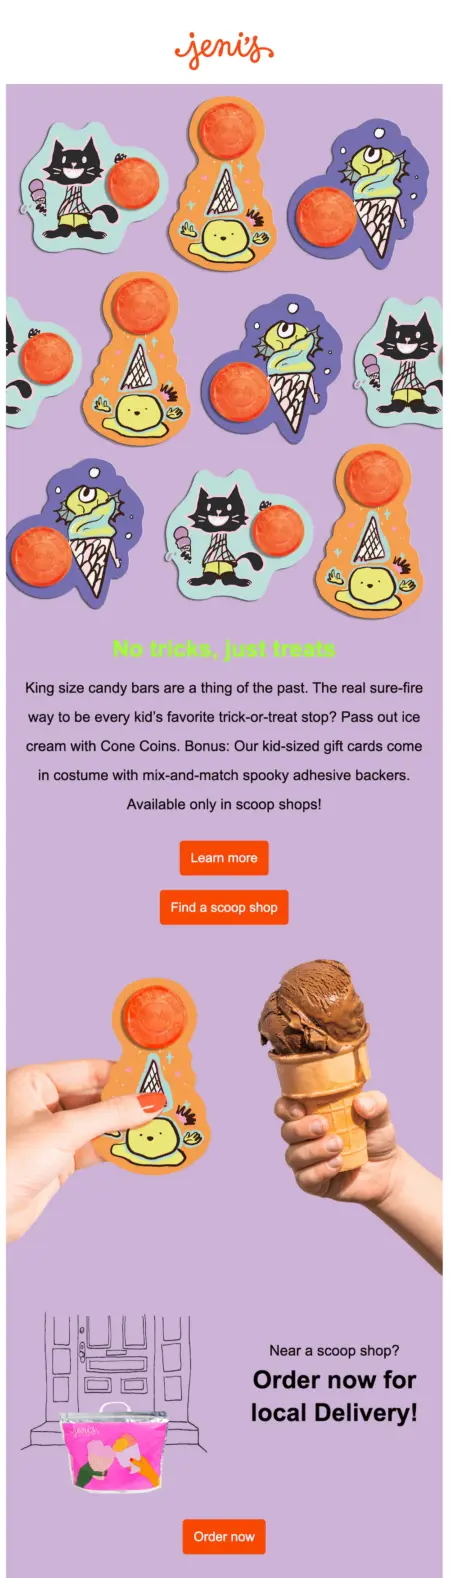 Image shows a marketing email from Jeni’s with a purple color palette and plenty of copy. The call to action button is bright orange.